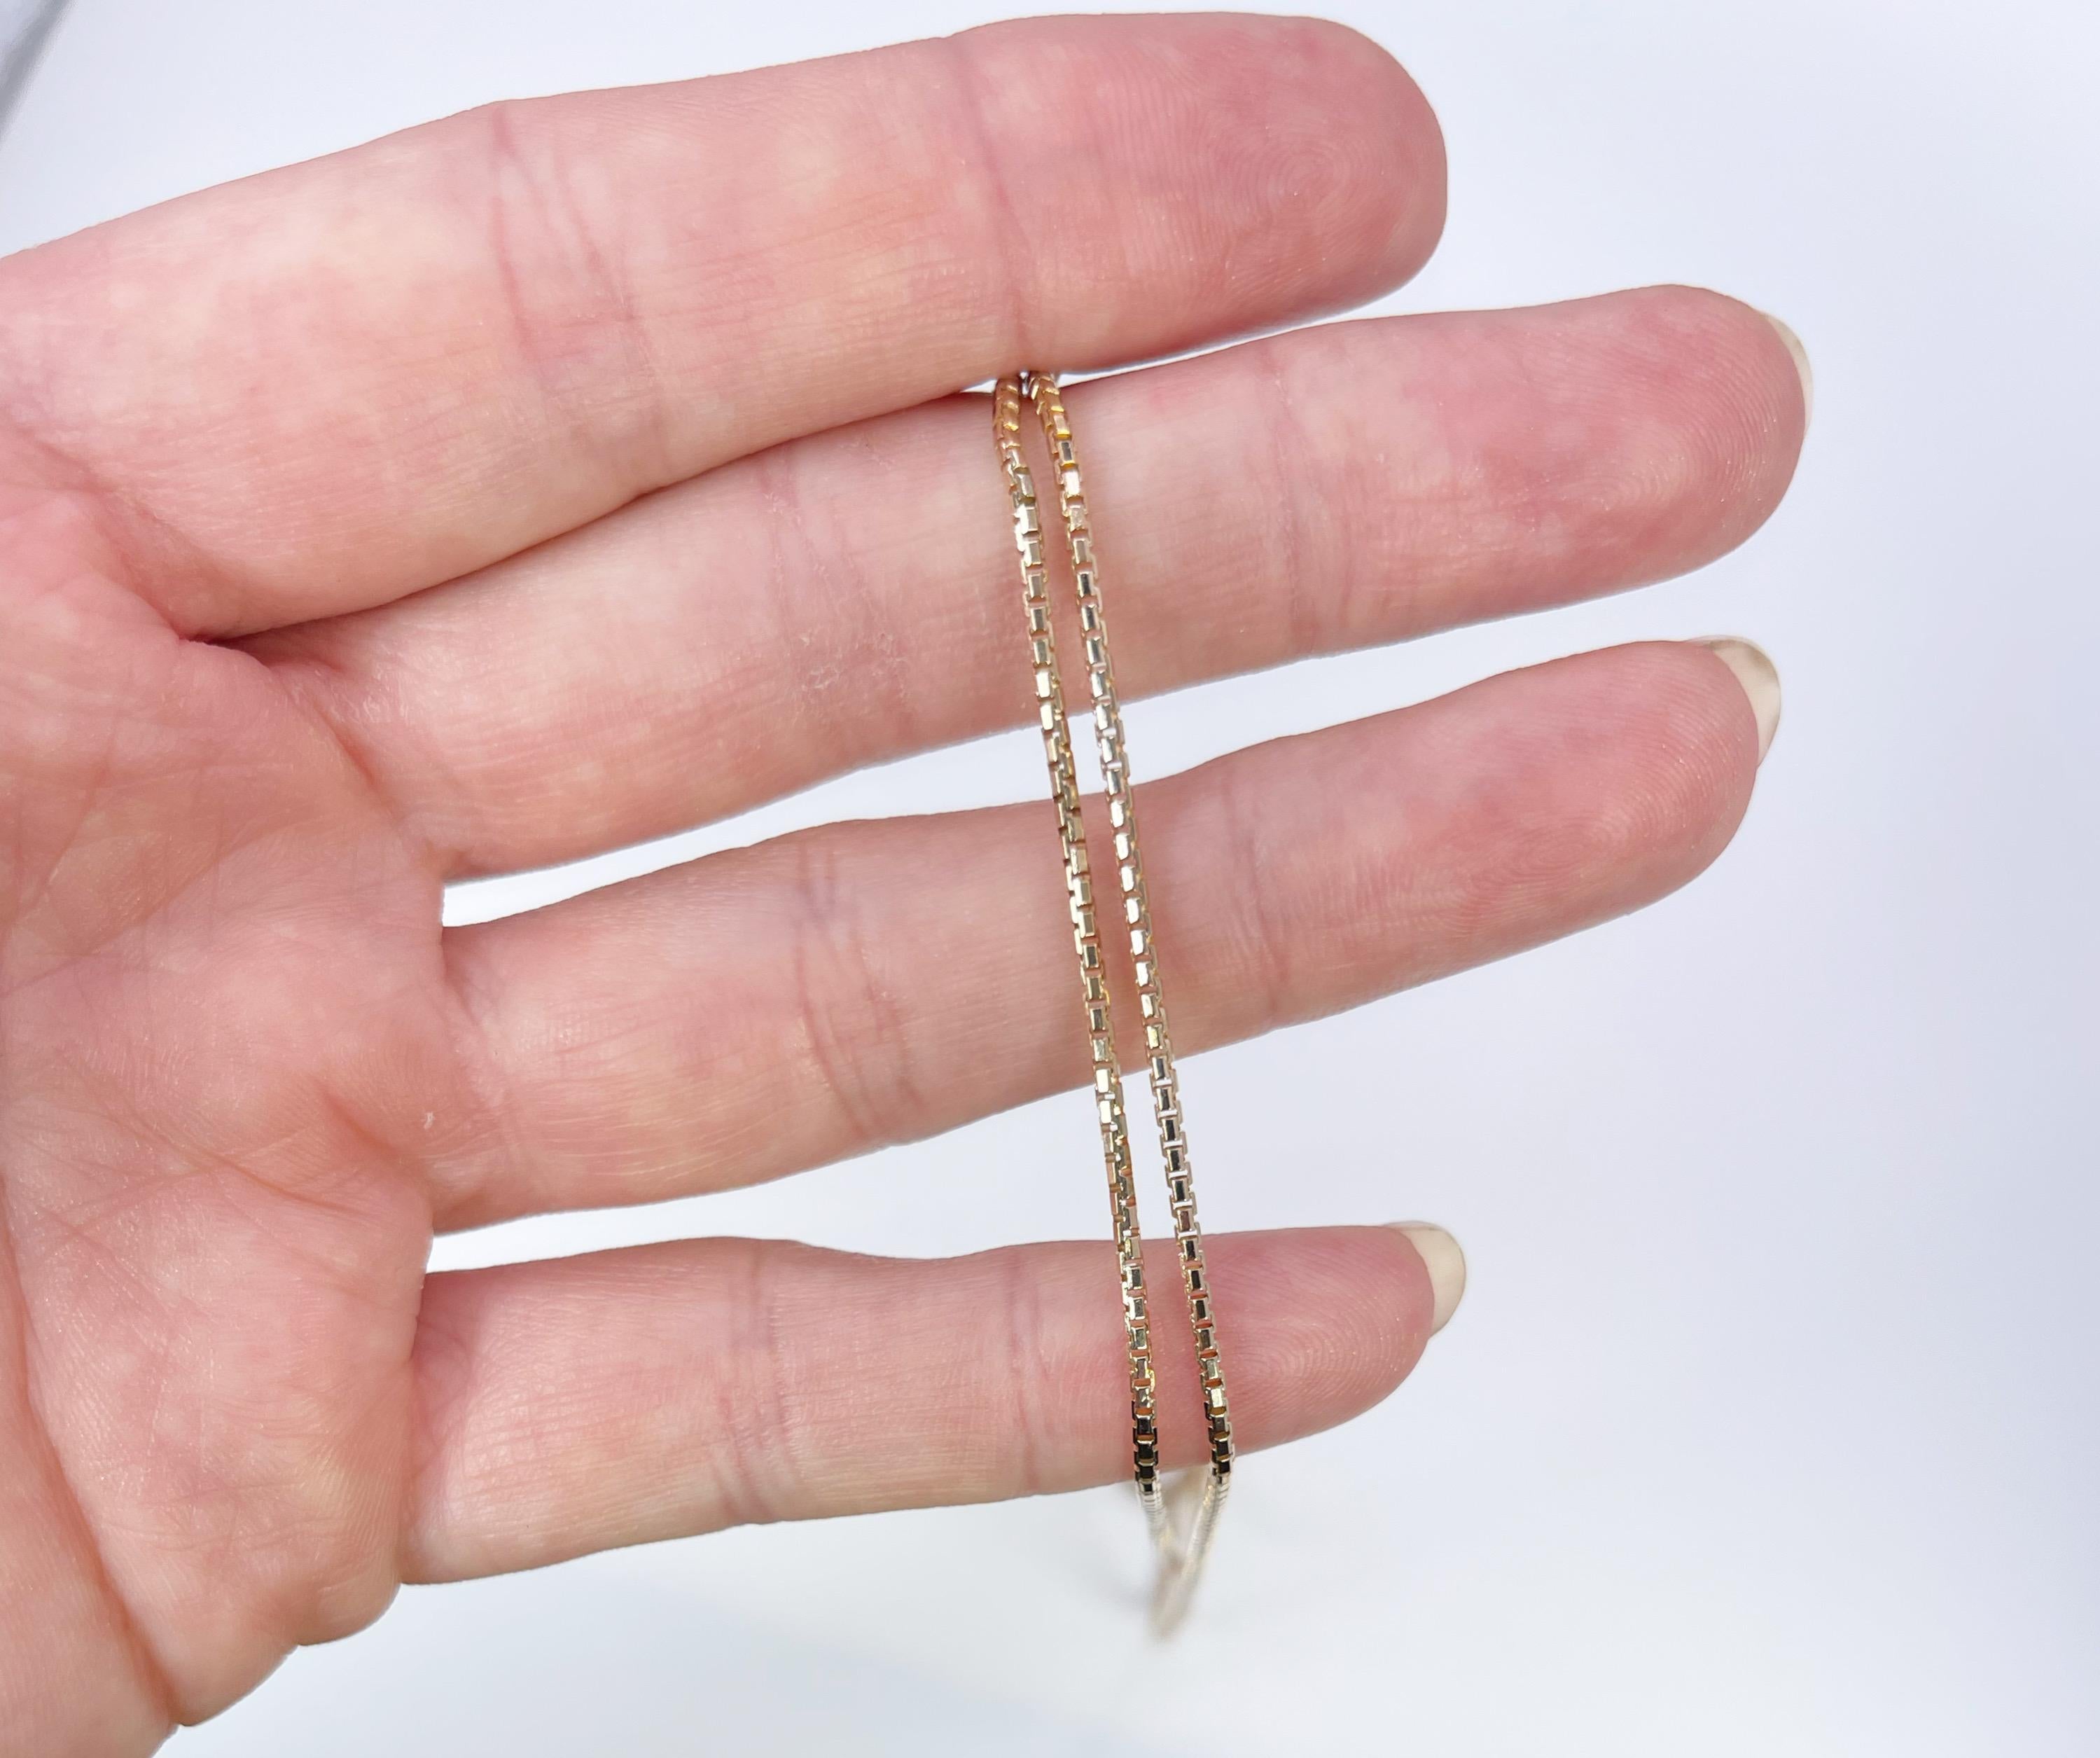 Simple chain, sterdy and well made made in 14KT yellow gold. 1.5mm wide and 18 inches long. Comes with certificate of authenticity and box ready for gifting!


GRAM WEIGHT: 6.40gr
GOLD: 14KT yellow gold



WHAT YOU GET AT STAMPAR JEWELERS:
Stampar